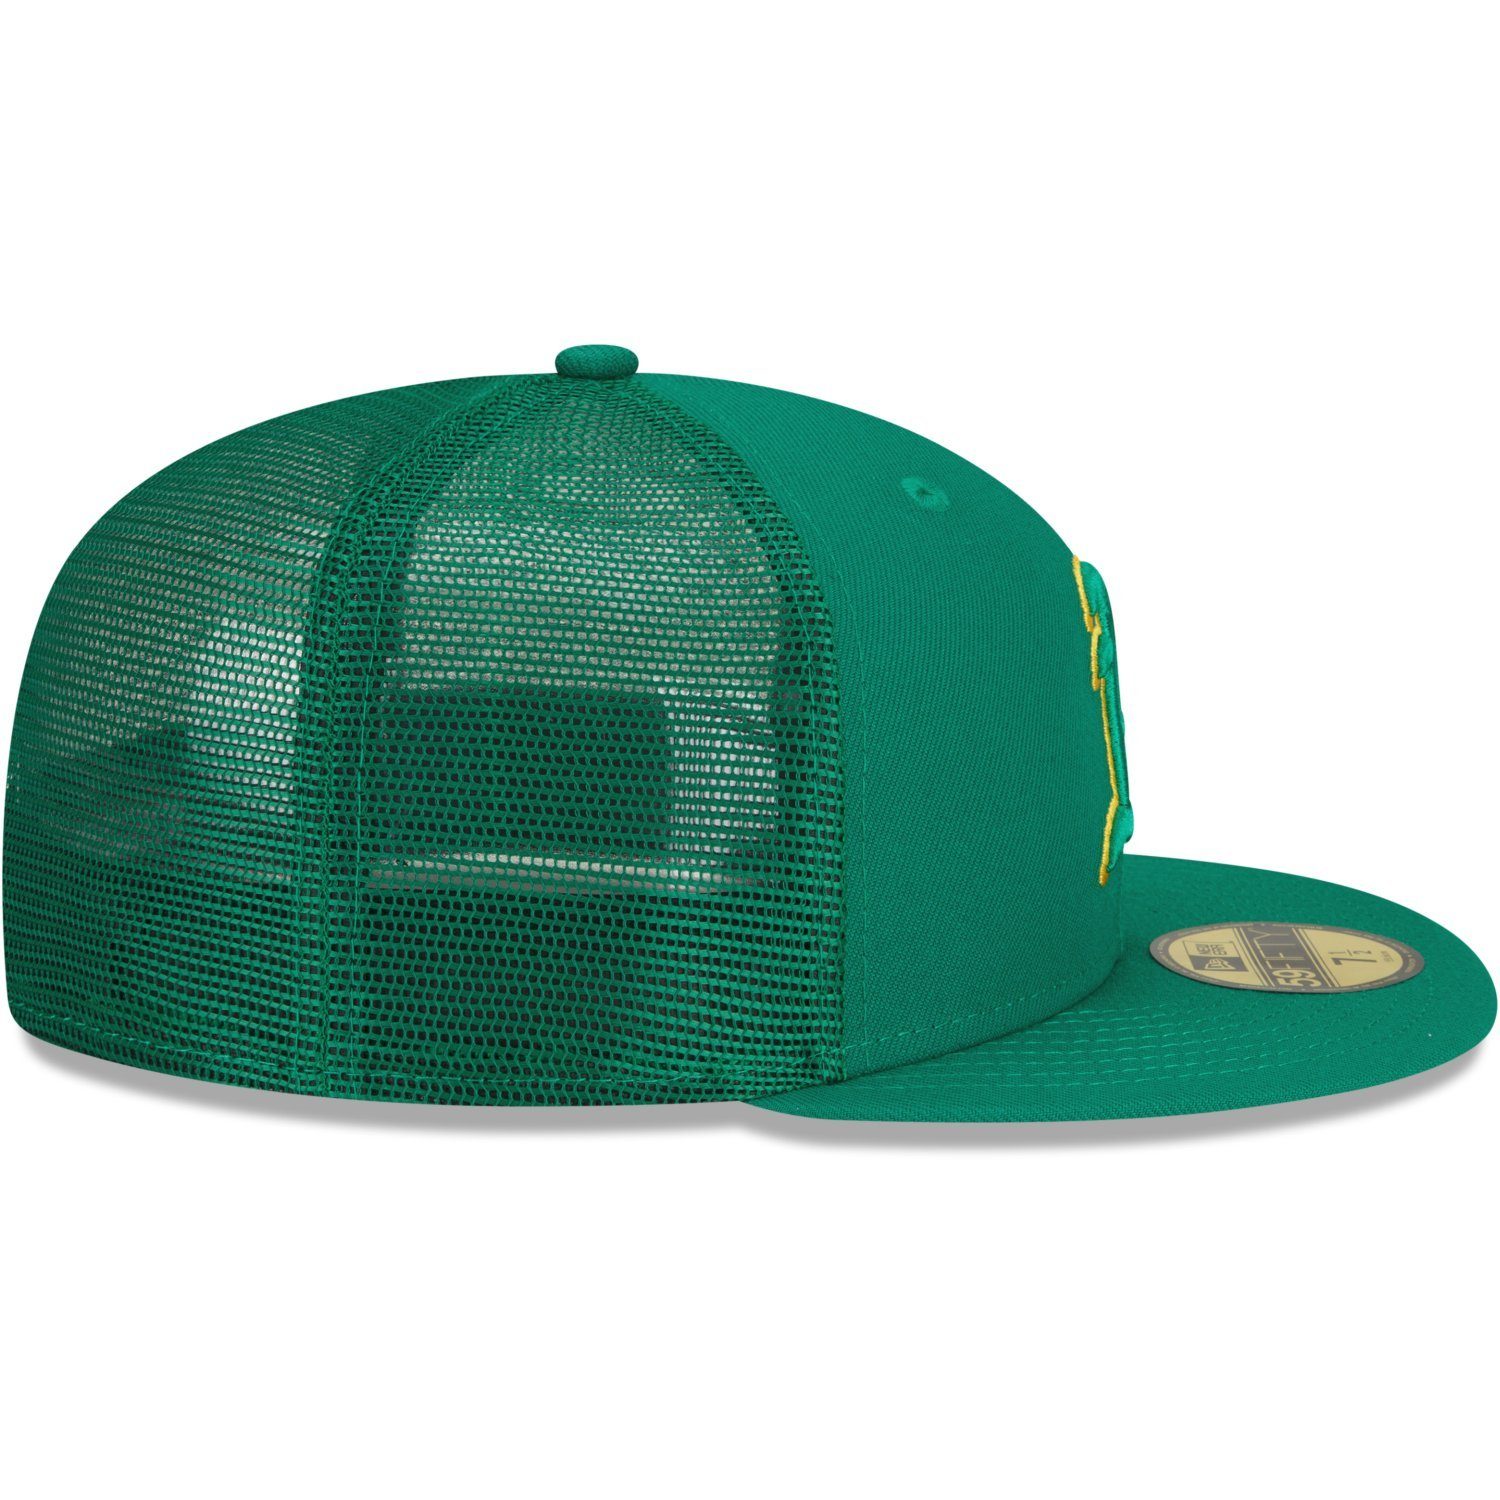 Oakland BATTING 59Fifty Fitted New Cap PRACTICE Era Athletics